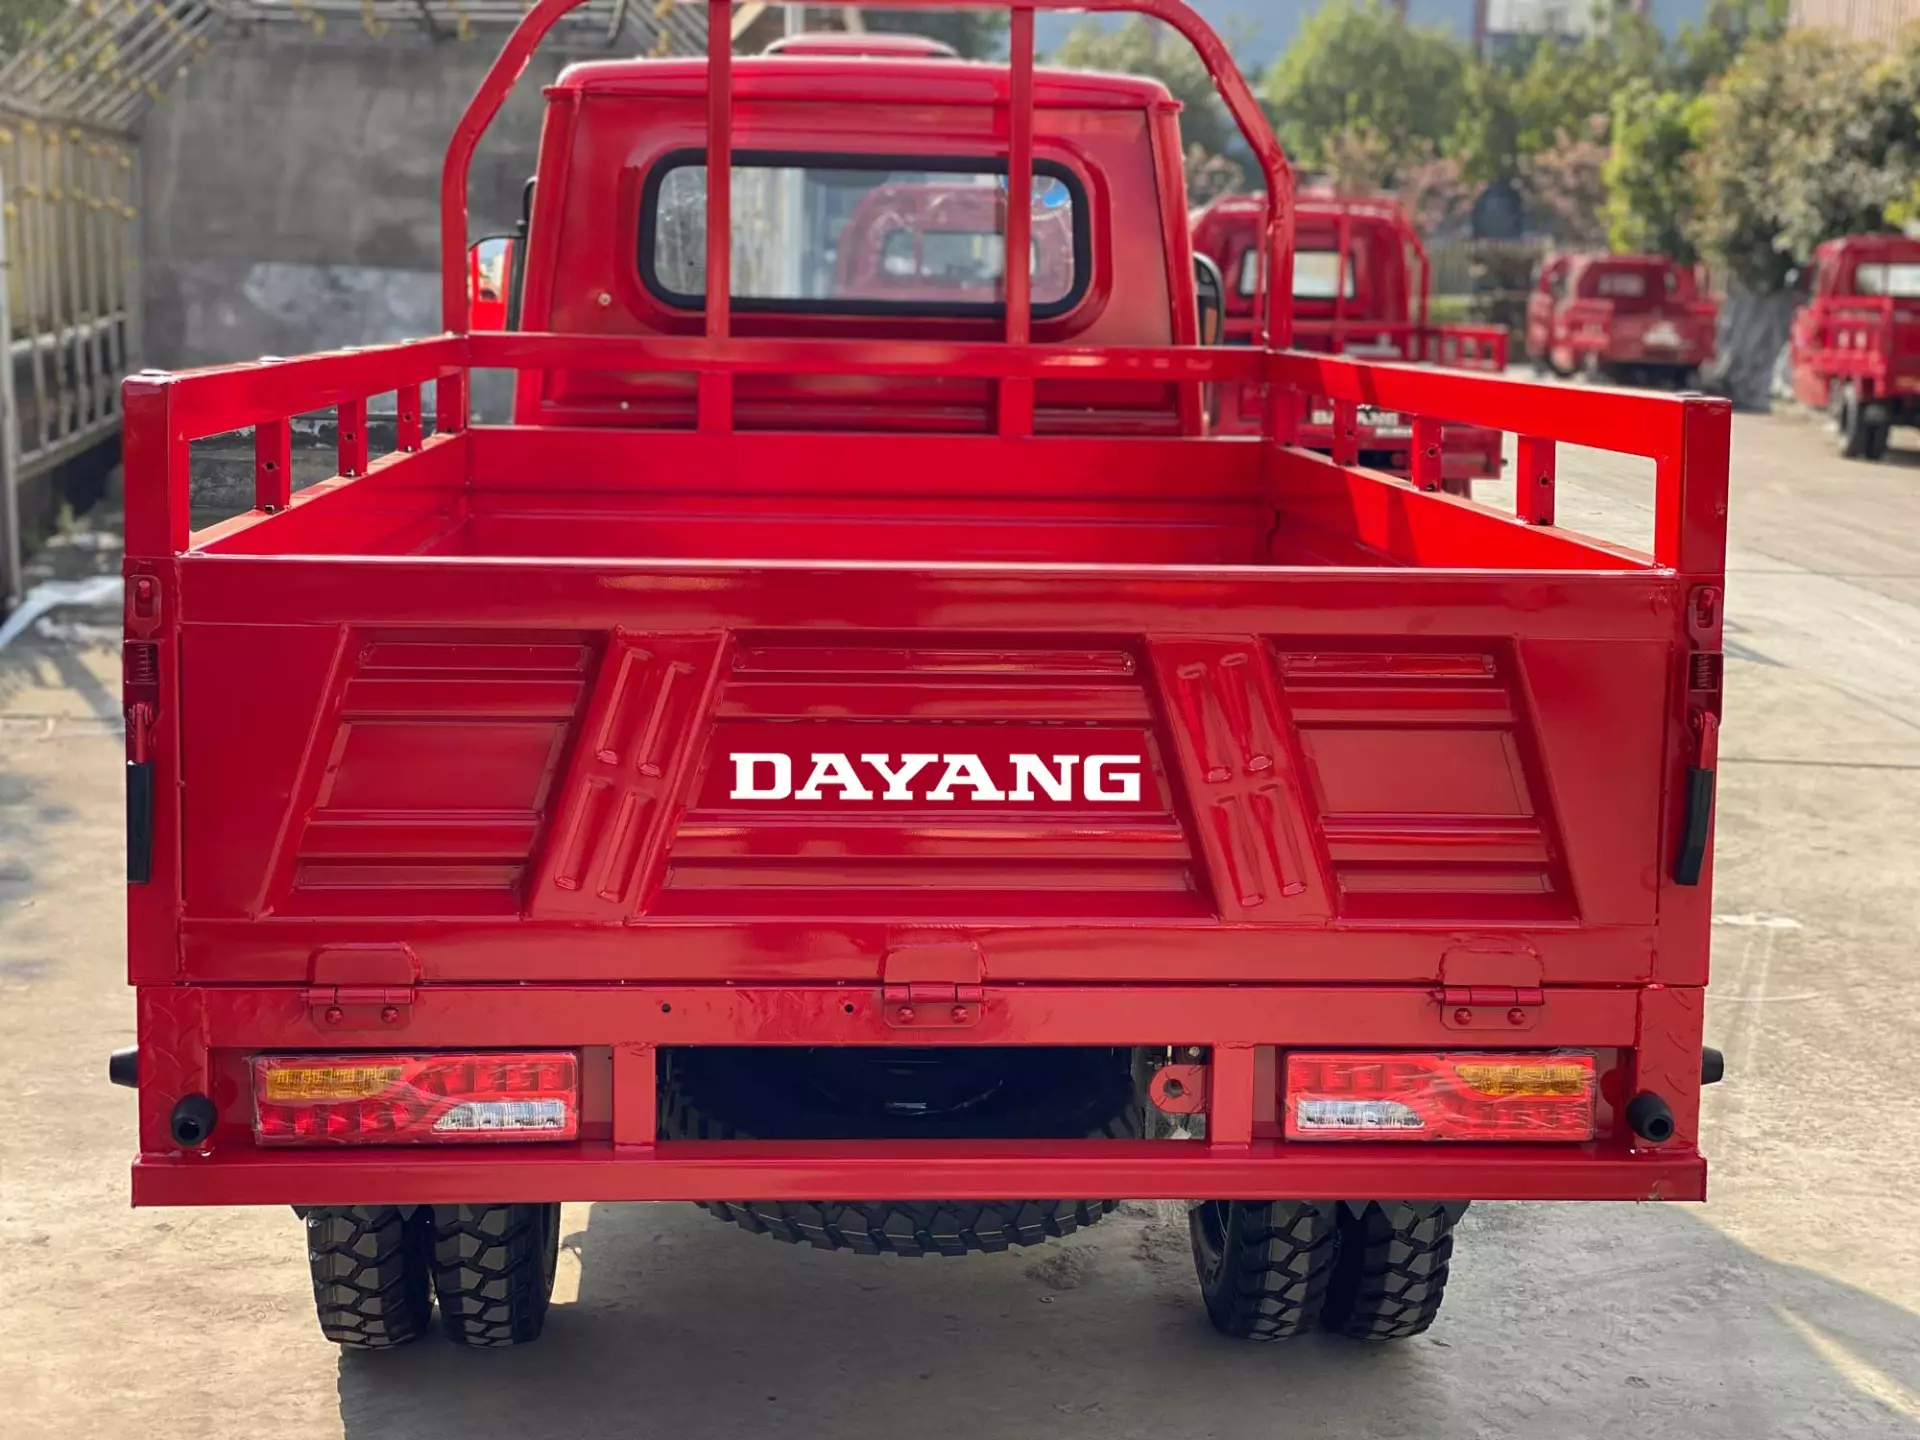 China DAYANG tricycle motorcycle contact showroom algeria cargo vehicle tricycle closed cabin cargo tricycle